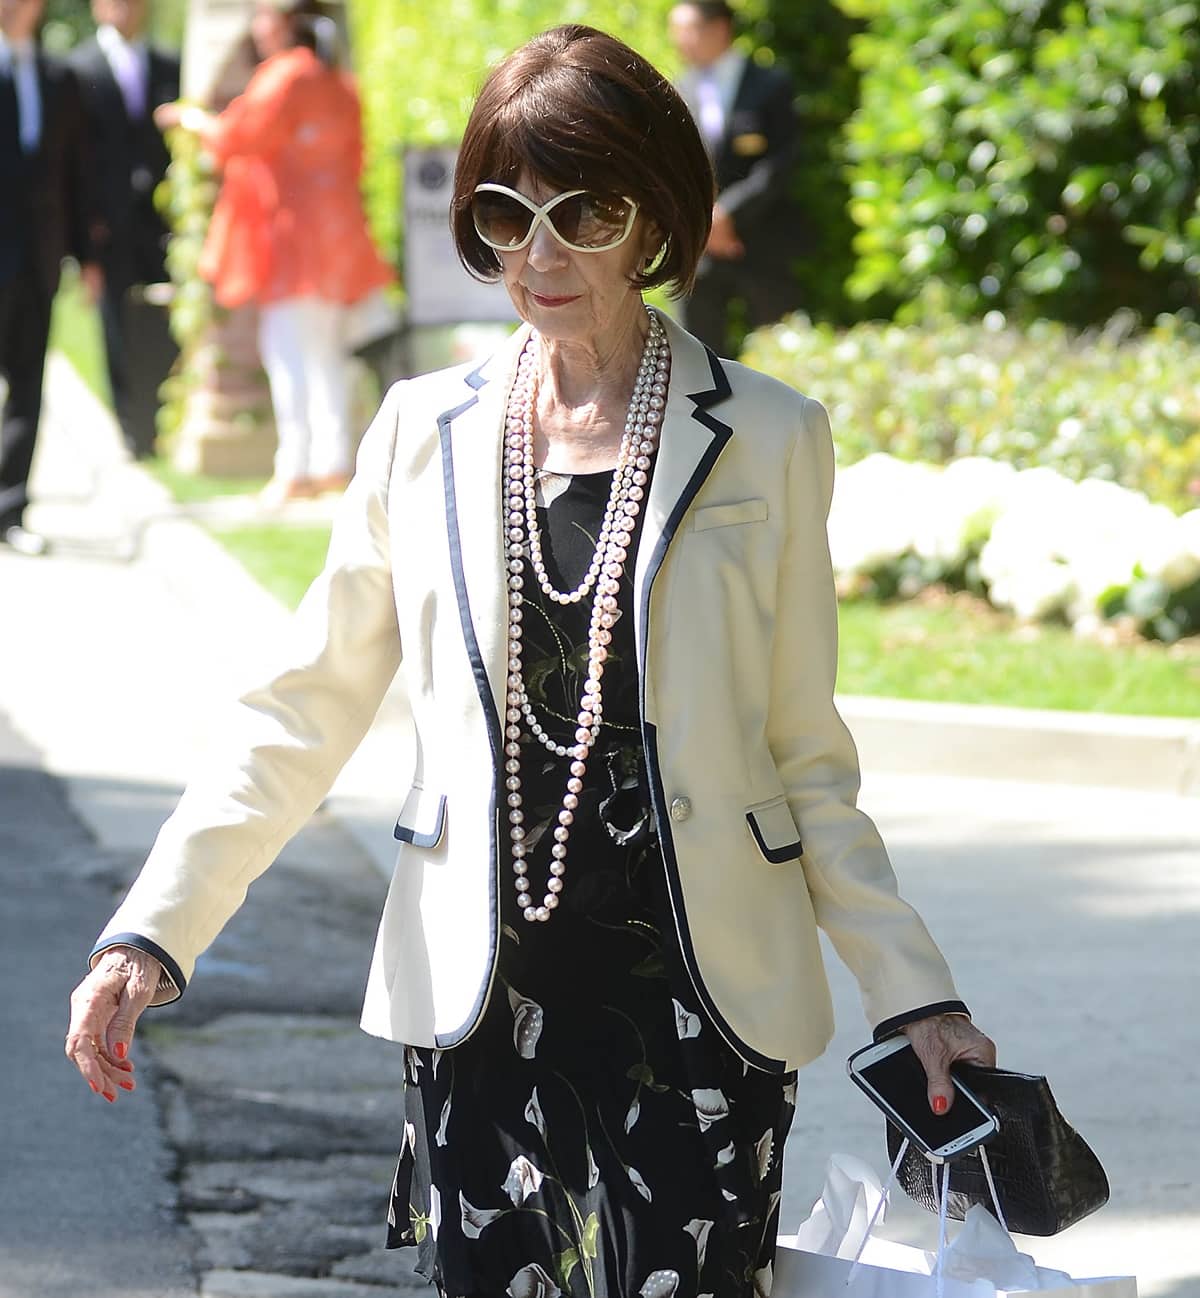 Mary Jo "MJ" Shannon is Kris Jenner's mother and a grandmother to Kris's six children